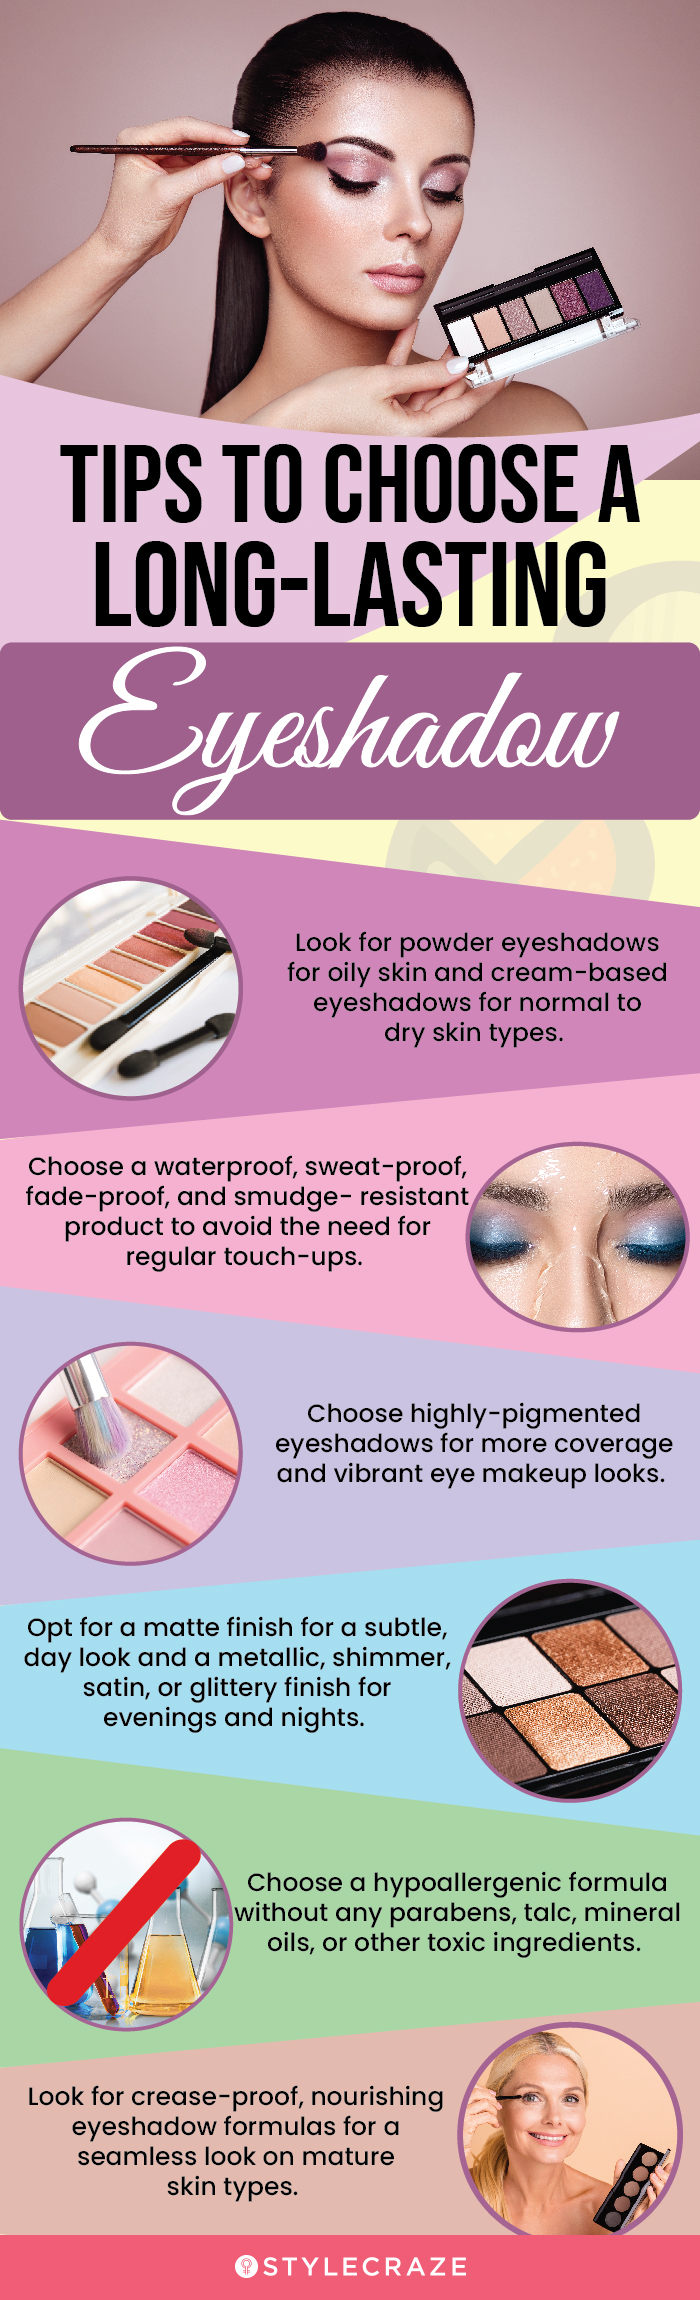 Tips To Choose A long-Lasting Eyeshadow [infographic]